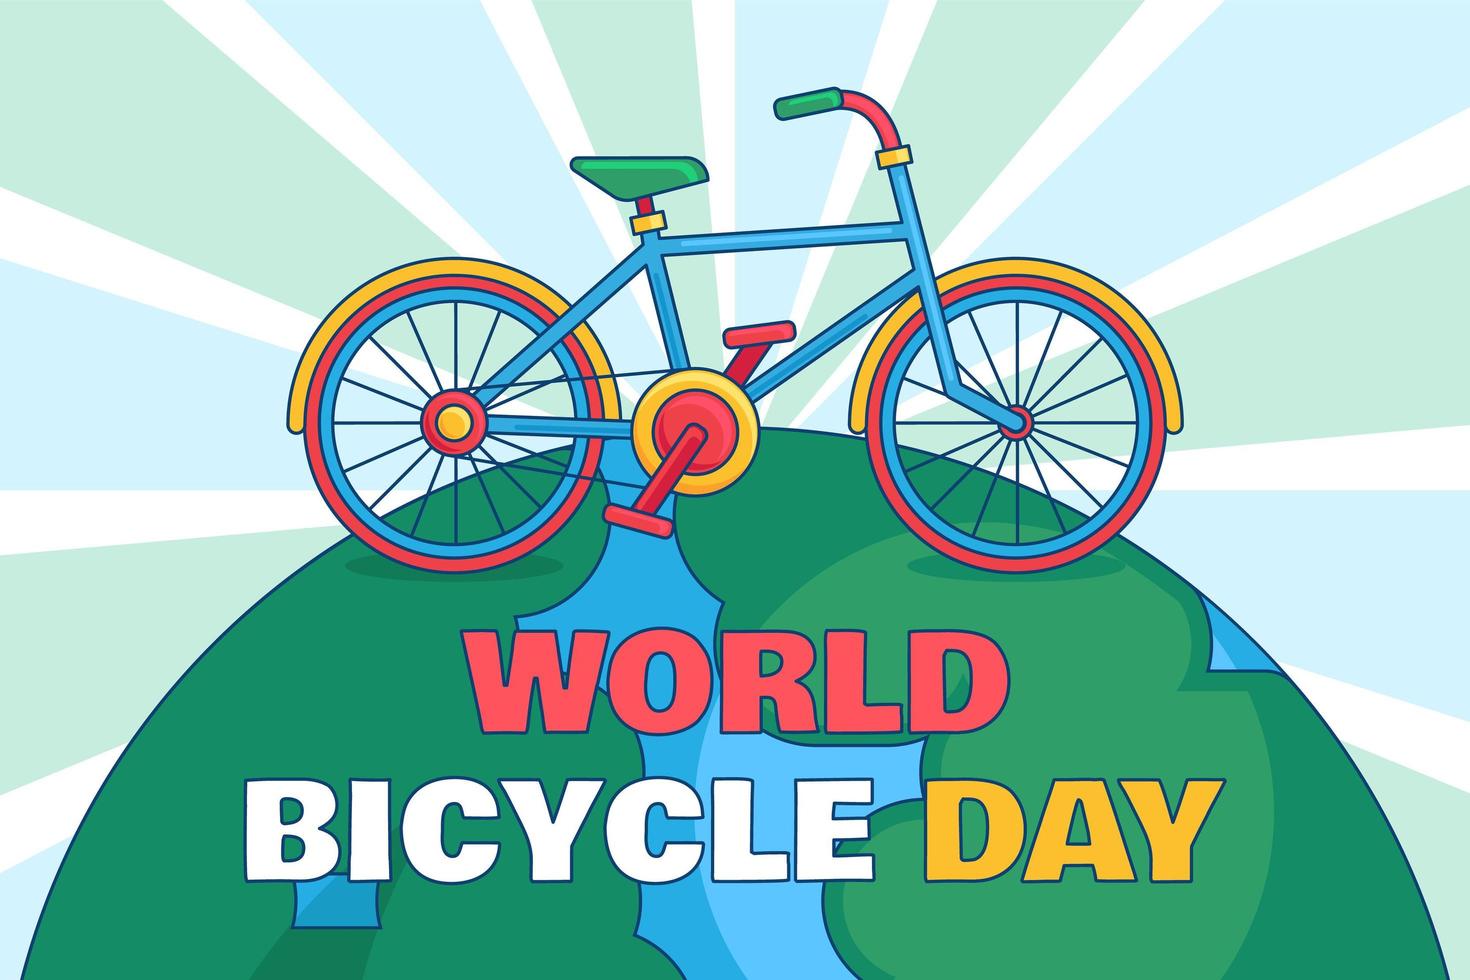 World Bicycle Day Illustration vector